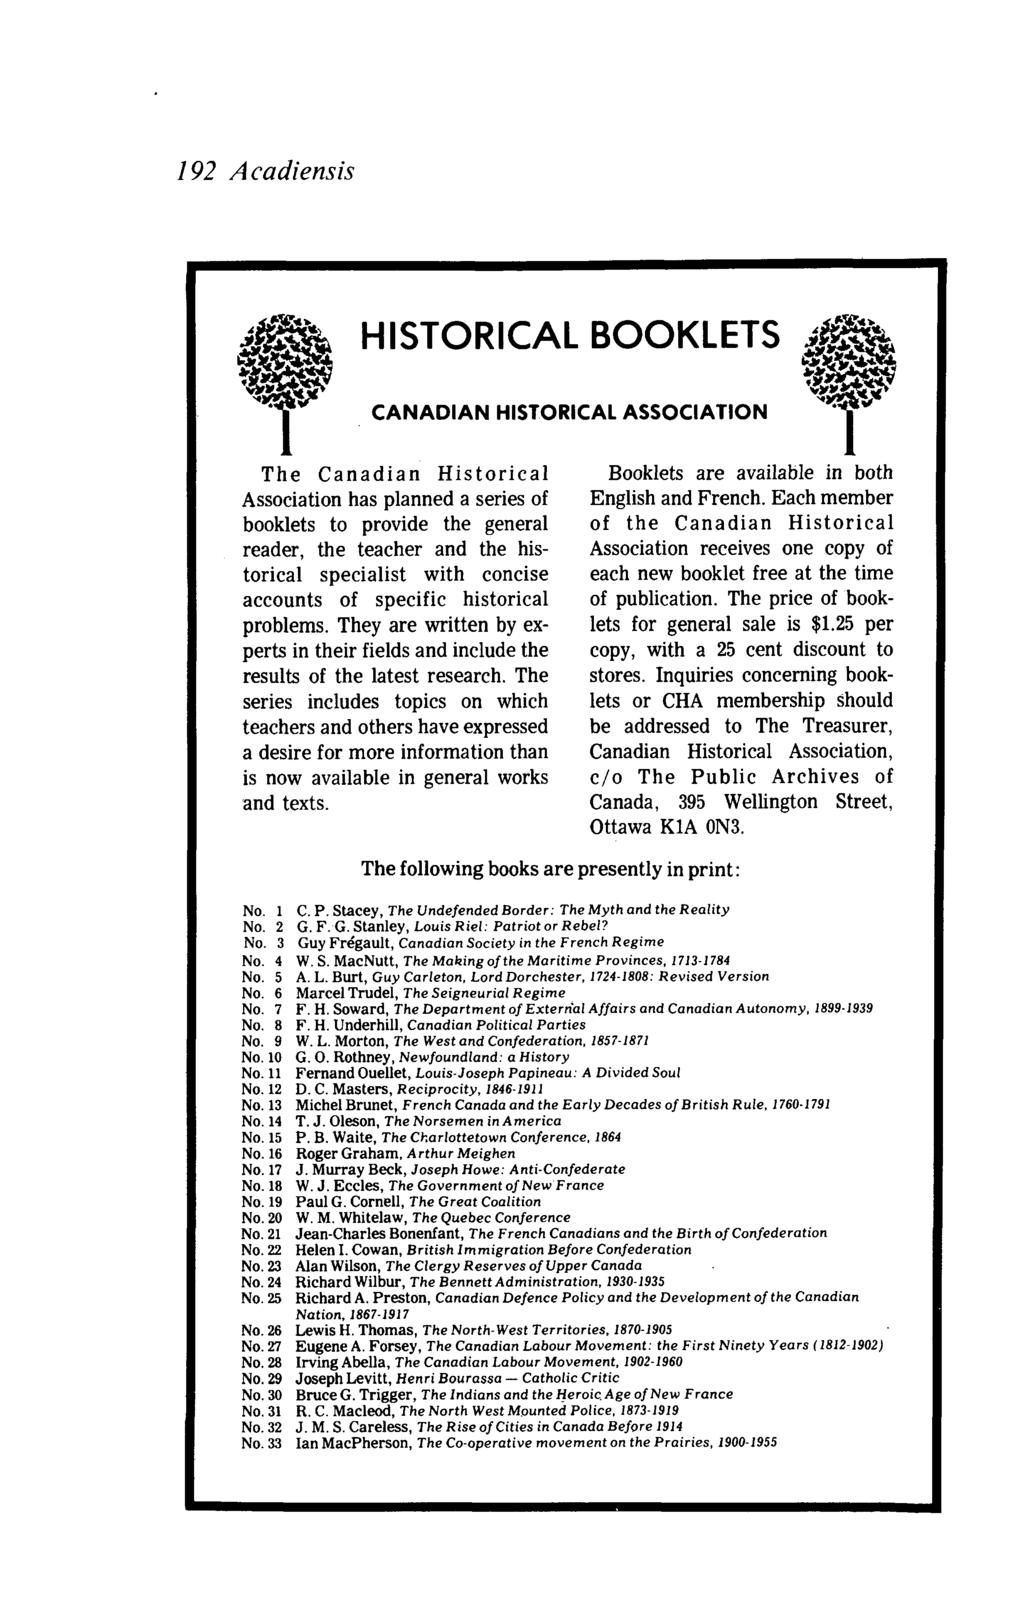 192 Acadiensis HISTORICAL BOOKLETS CANADIAN HISTORICAL ASSOCIATION The Canadian Historical Association has planned a series of booklets to provide the general reader, the teacher and the historical